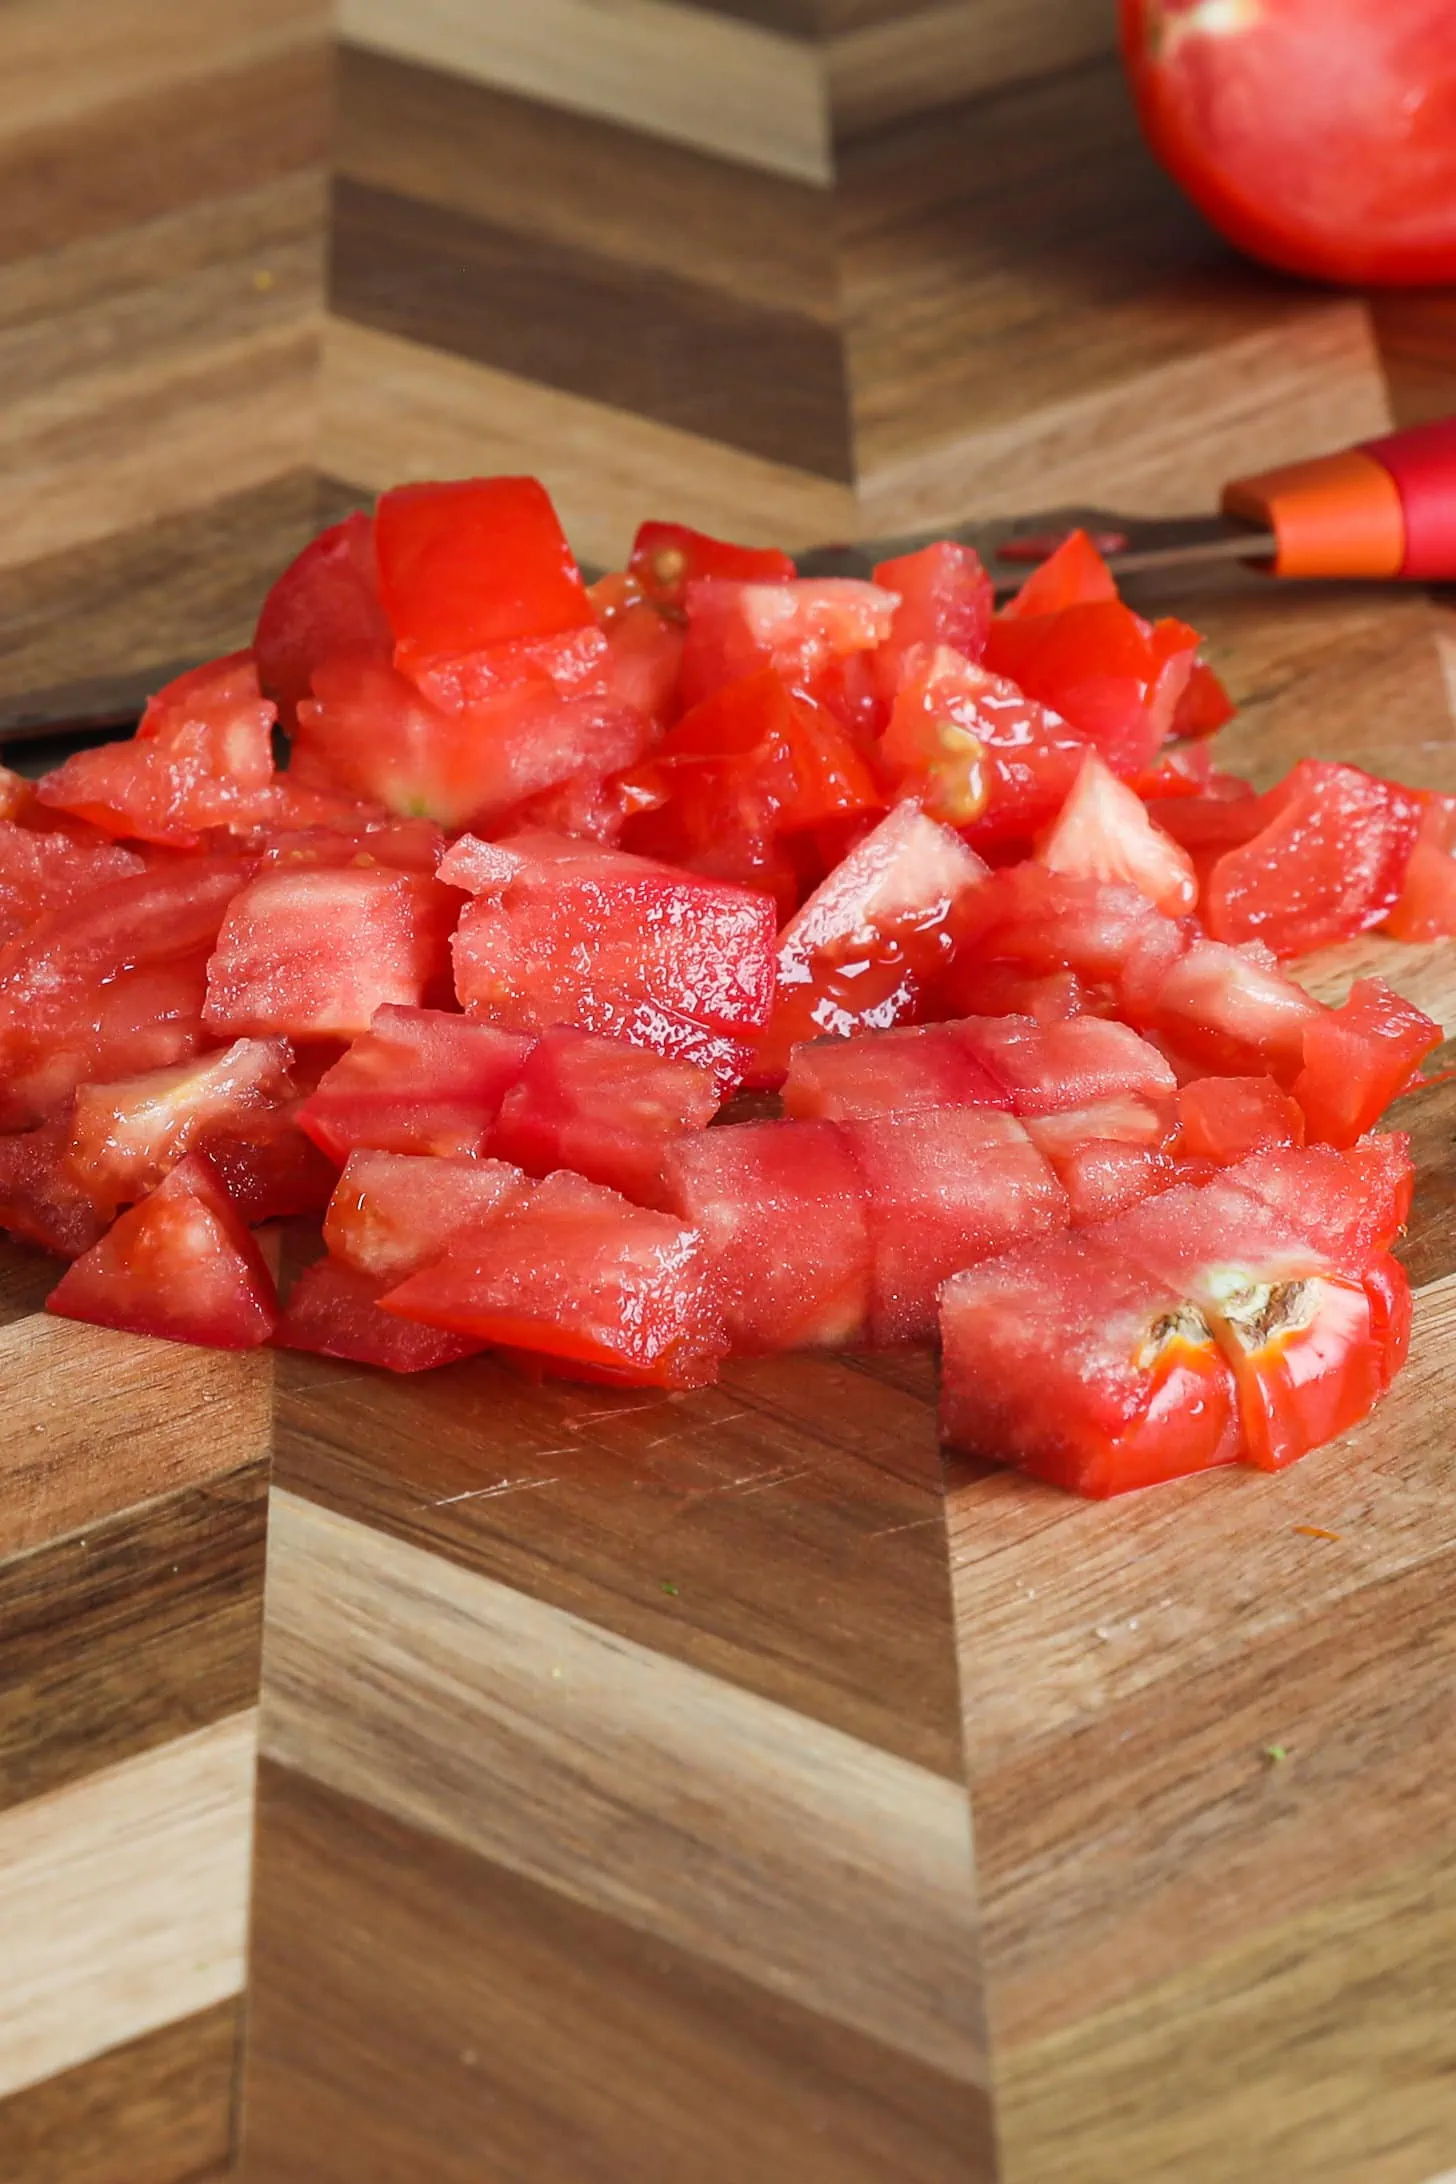 Chopped tomato on a wooden board.